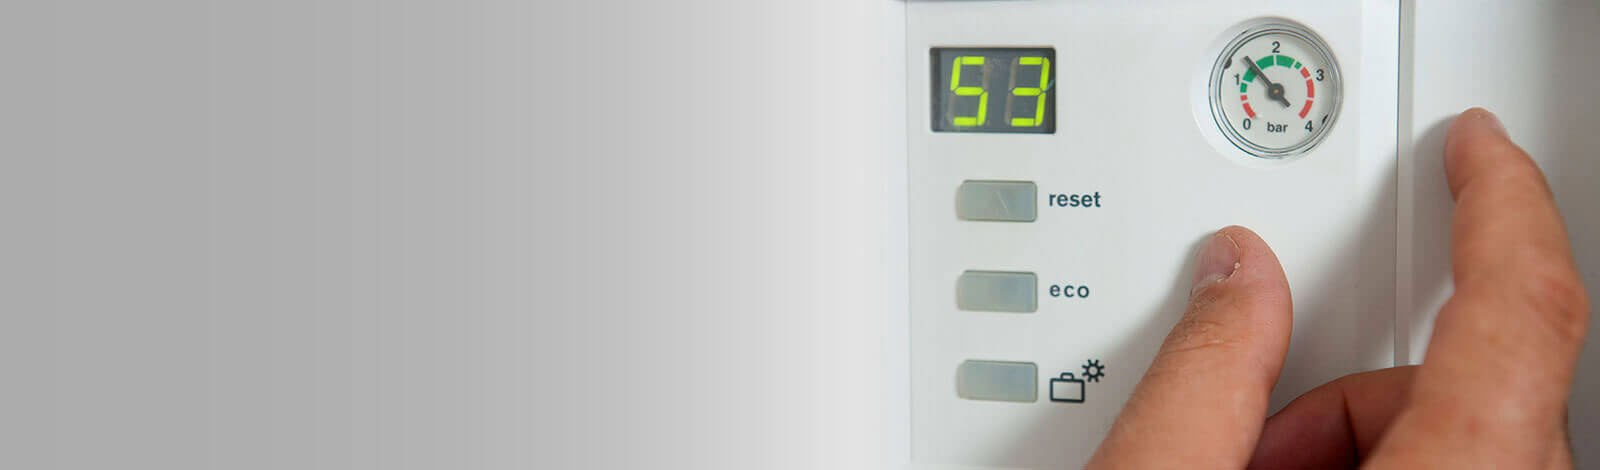 Thermostat banner